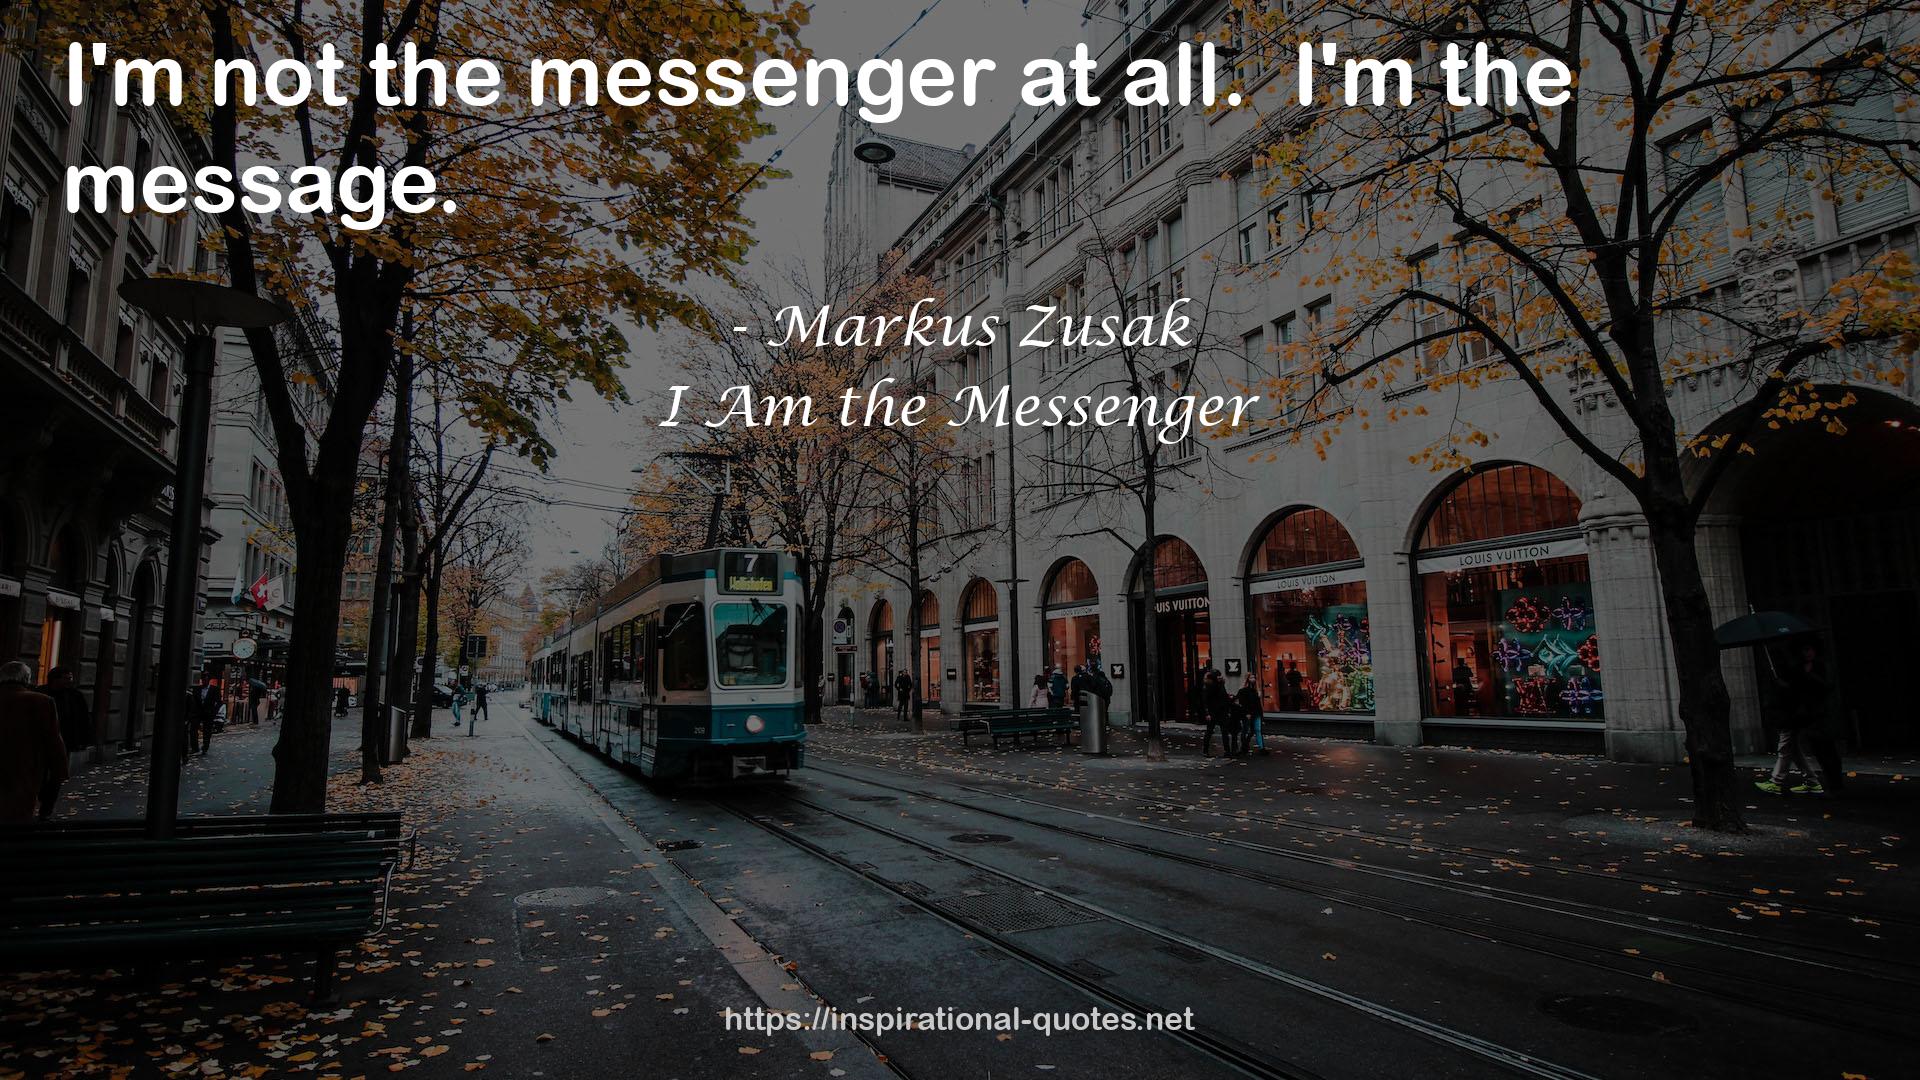 I Am the Messenger QUOTES